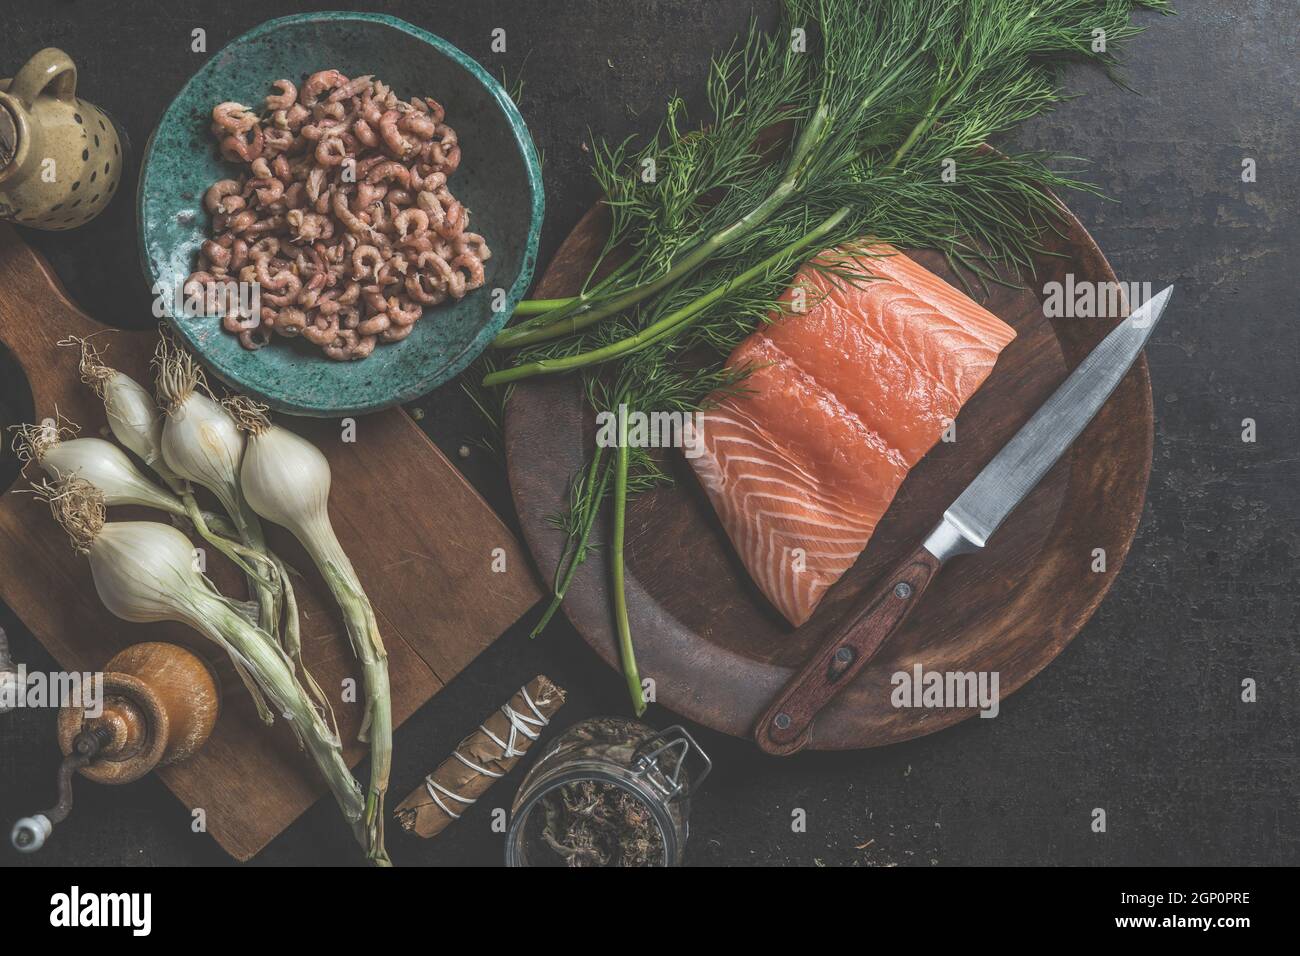 Raw portioned salmon fillet on wooden plate with knife, dill and north sea crab and other ingredients for healthy cooking. Top view Stock Photo